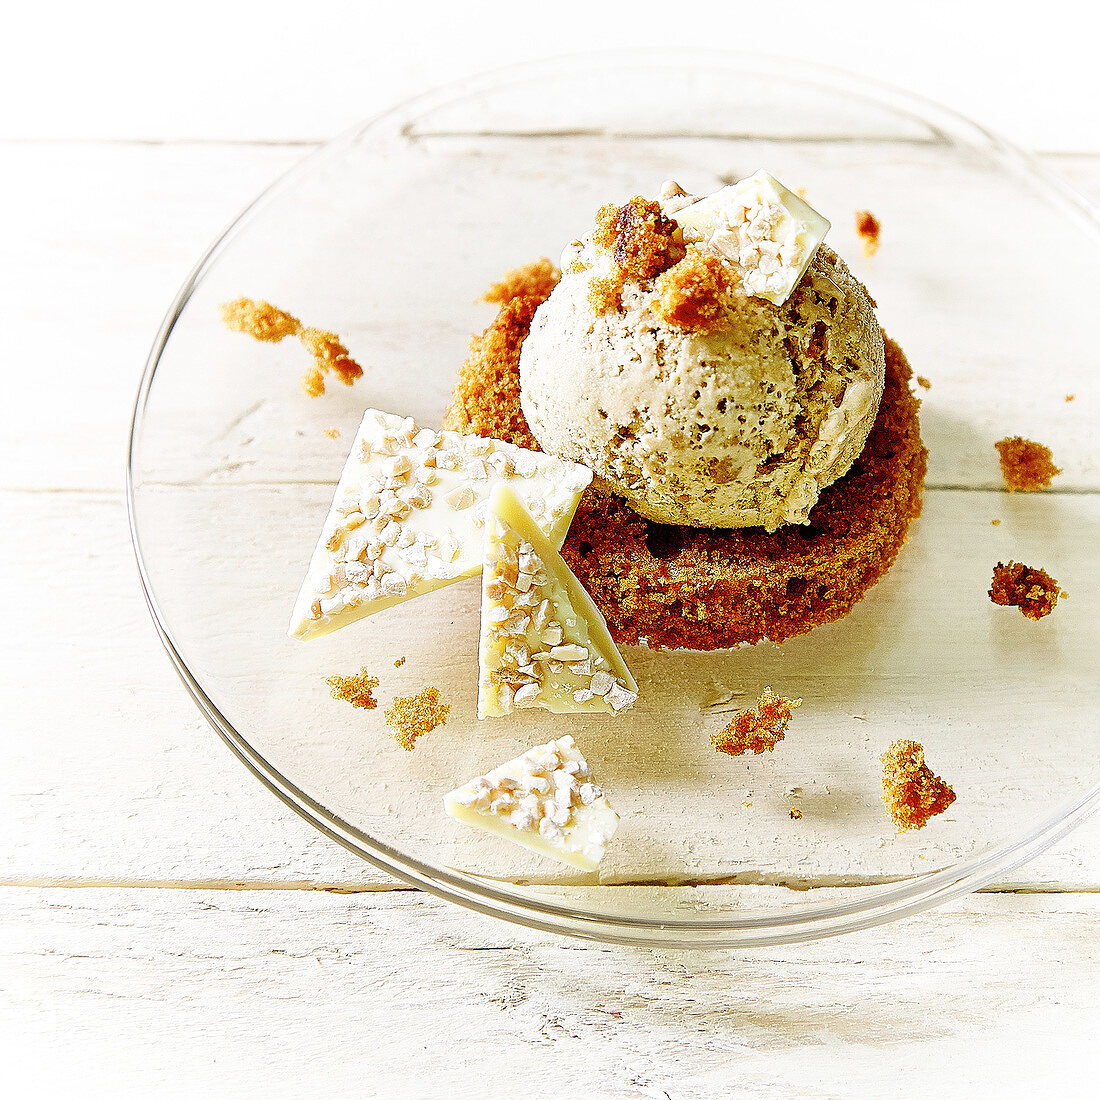 Vanilla ice cream on a slice of gingerbread with white chocolate flakes